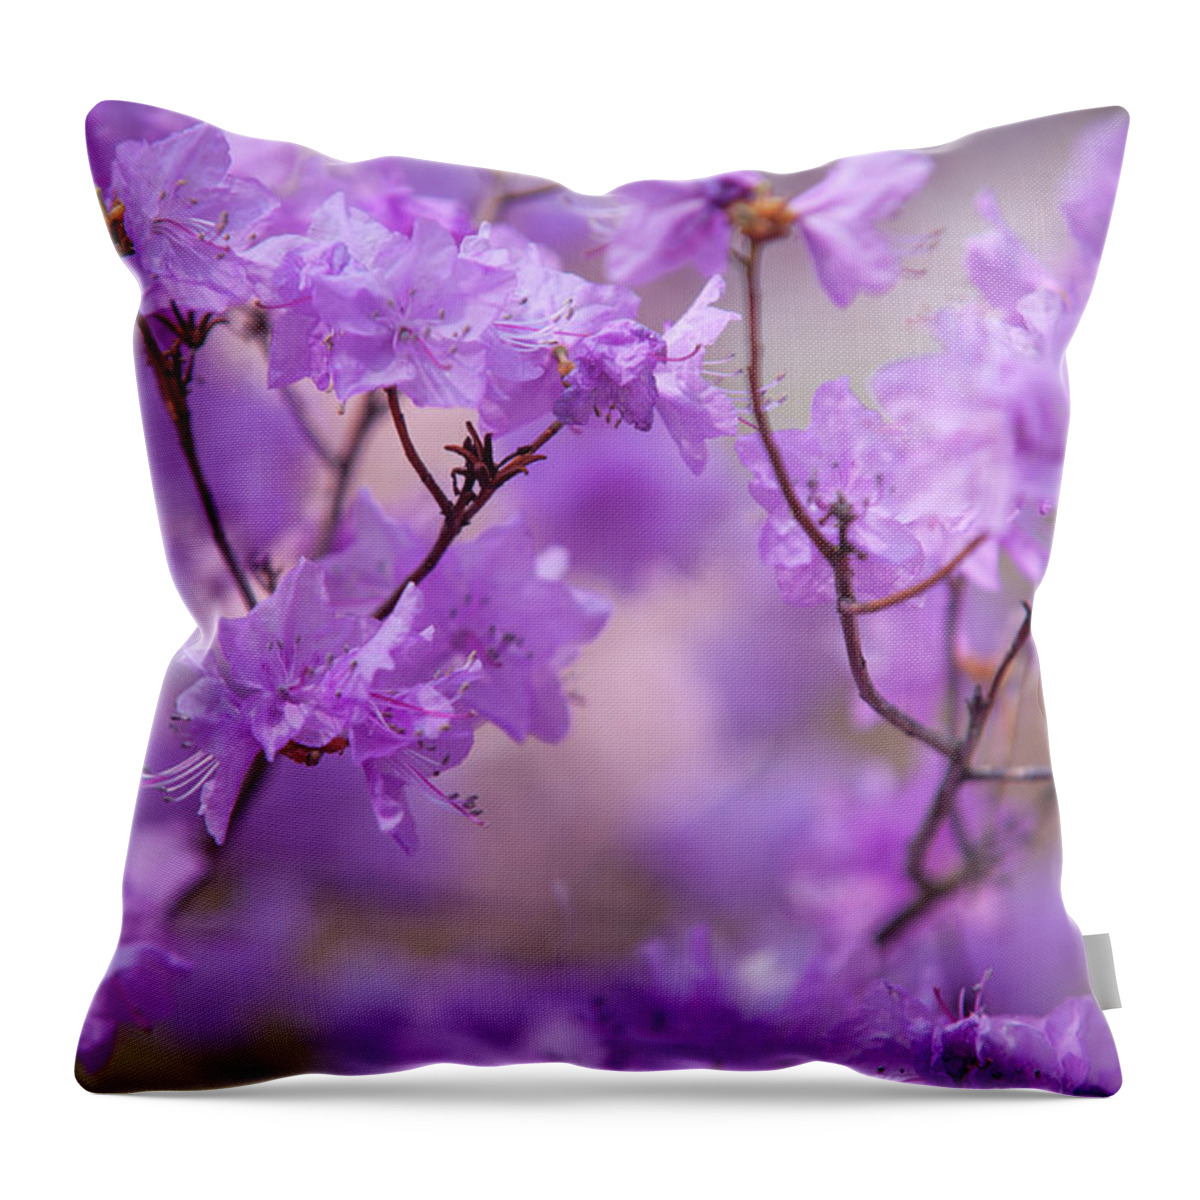 Jenny Rainbow Fine Art Photography Throw Pillow featuring the photograph Purple Delight. Spring Watercolors by Jenny Rainbow